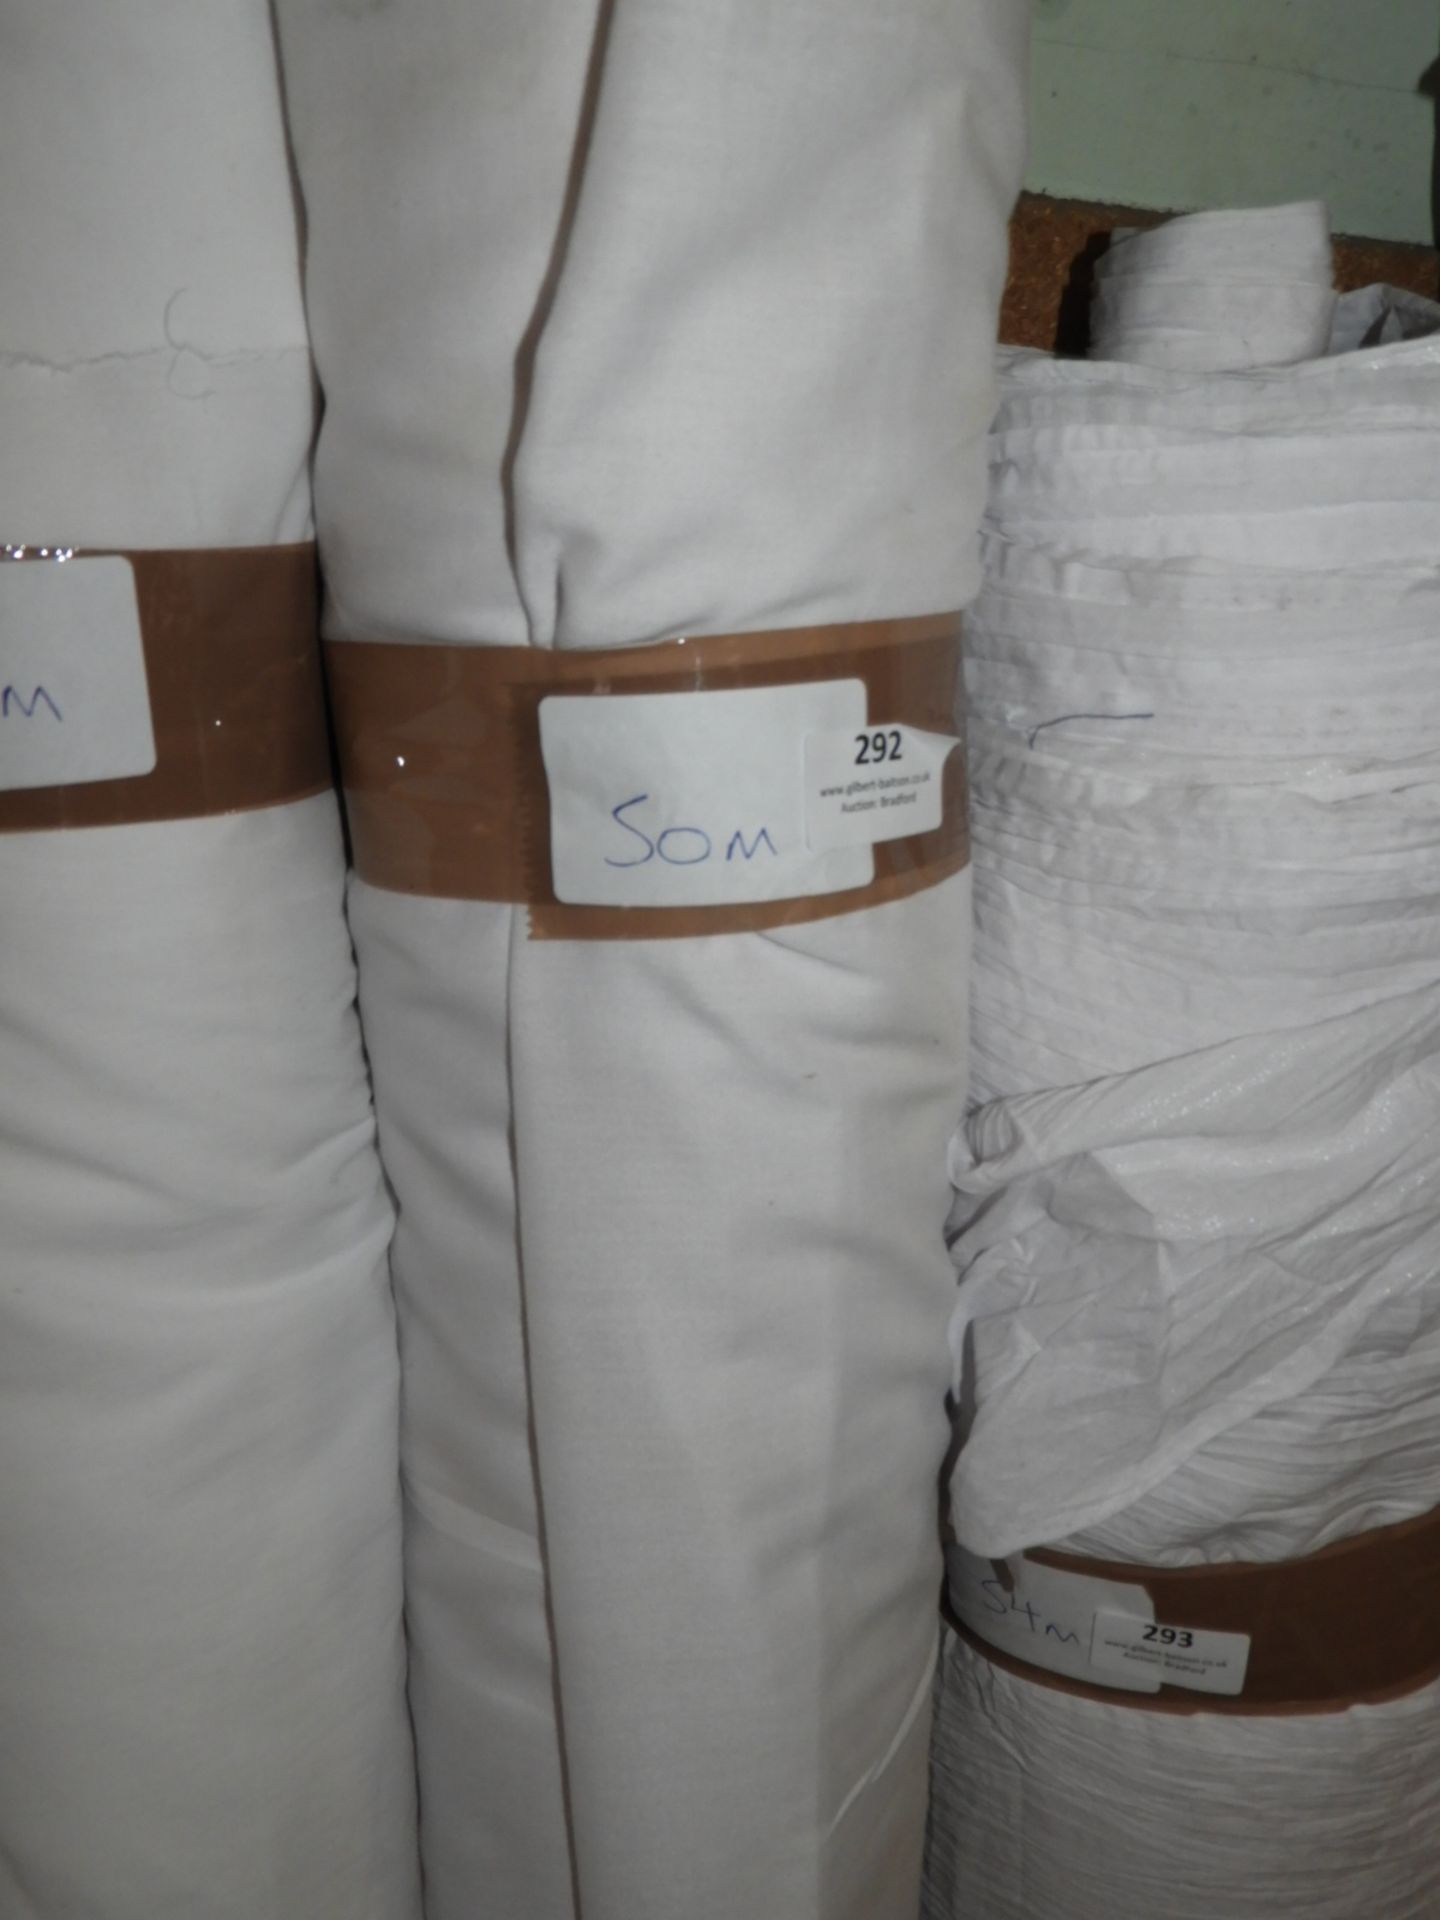 50m Roll of White Fabric